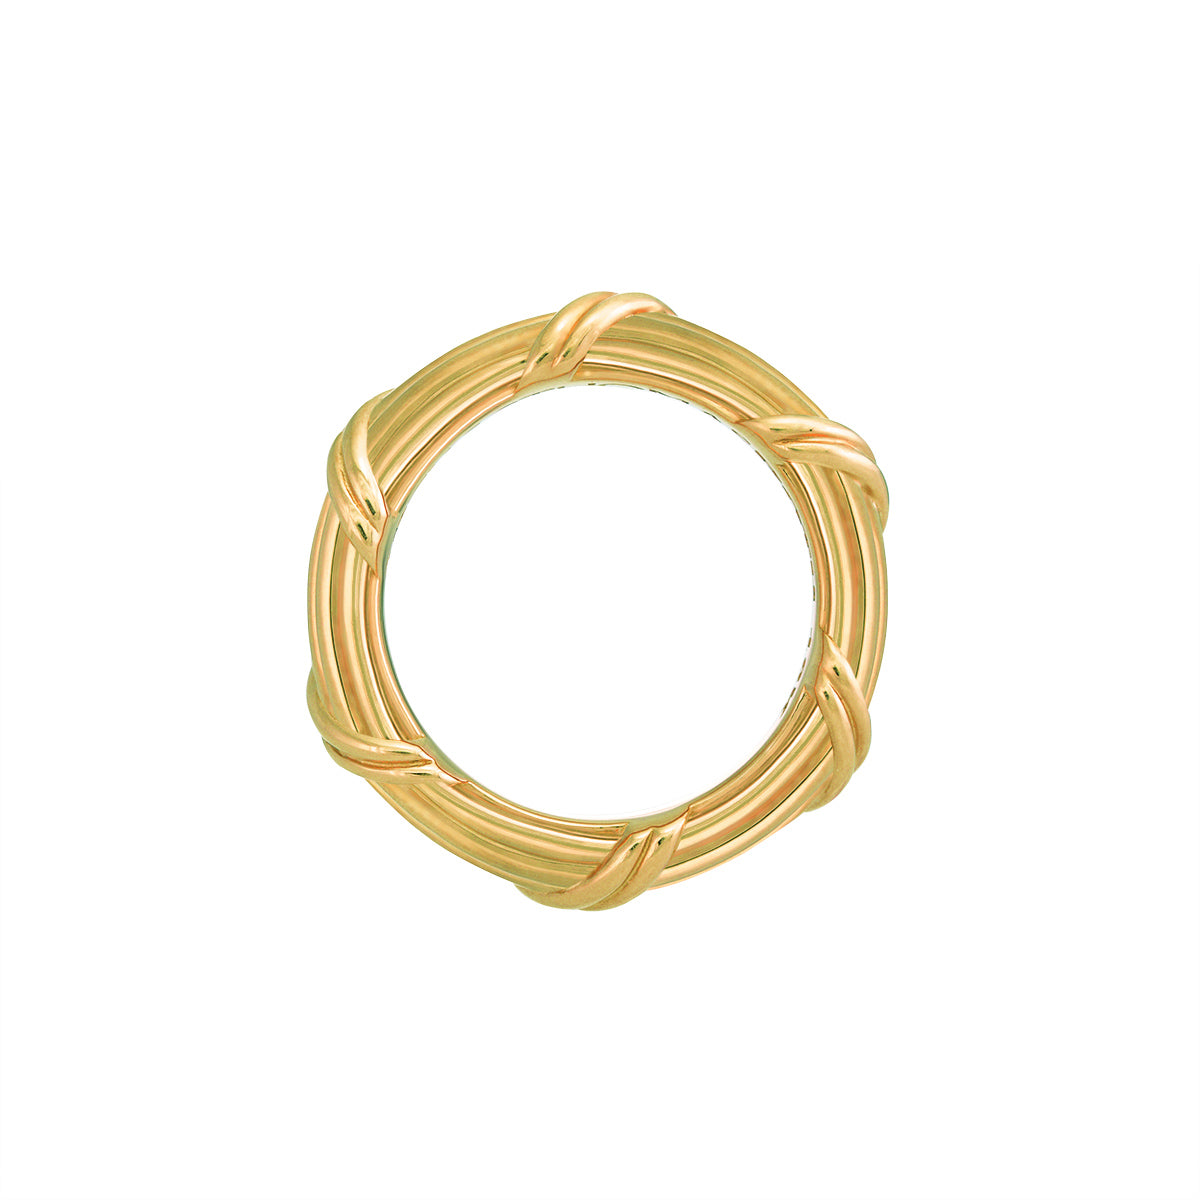 Heritage Band Ring in 18K yellow gold 4 mm sizes 5 - 10